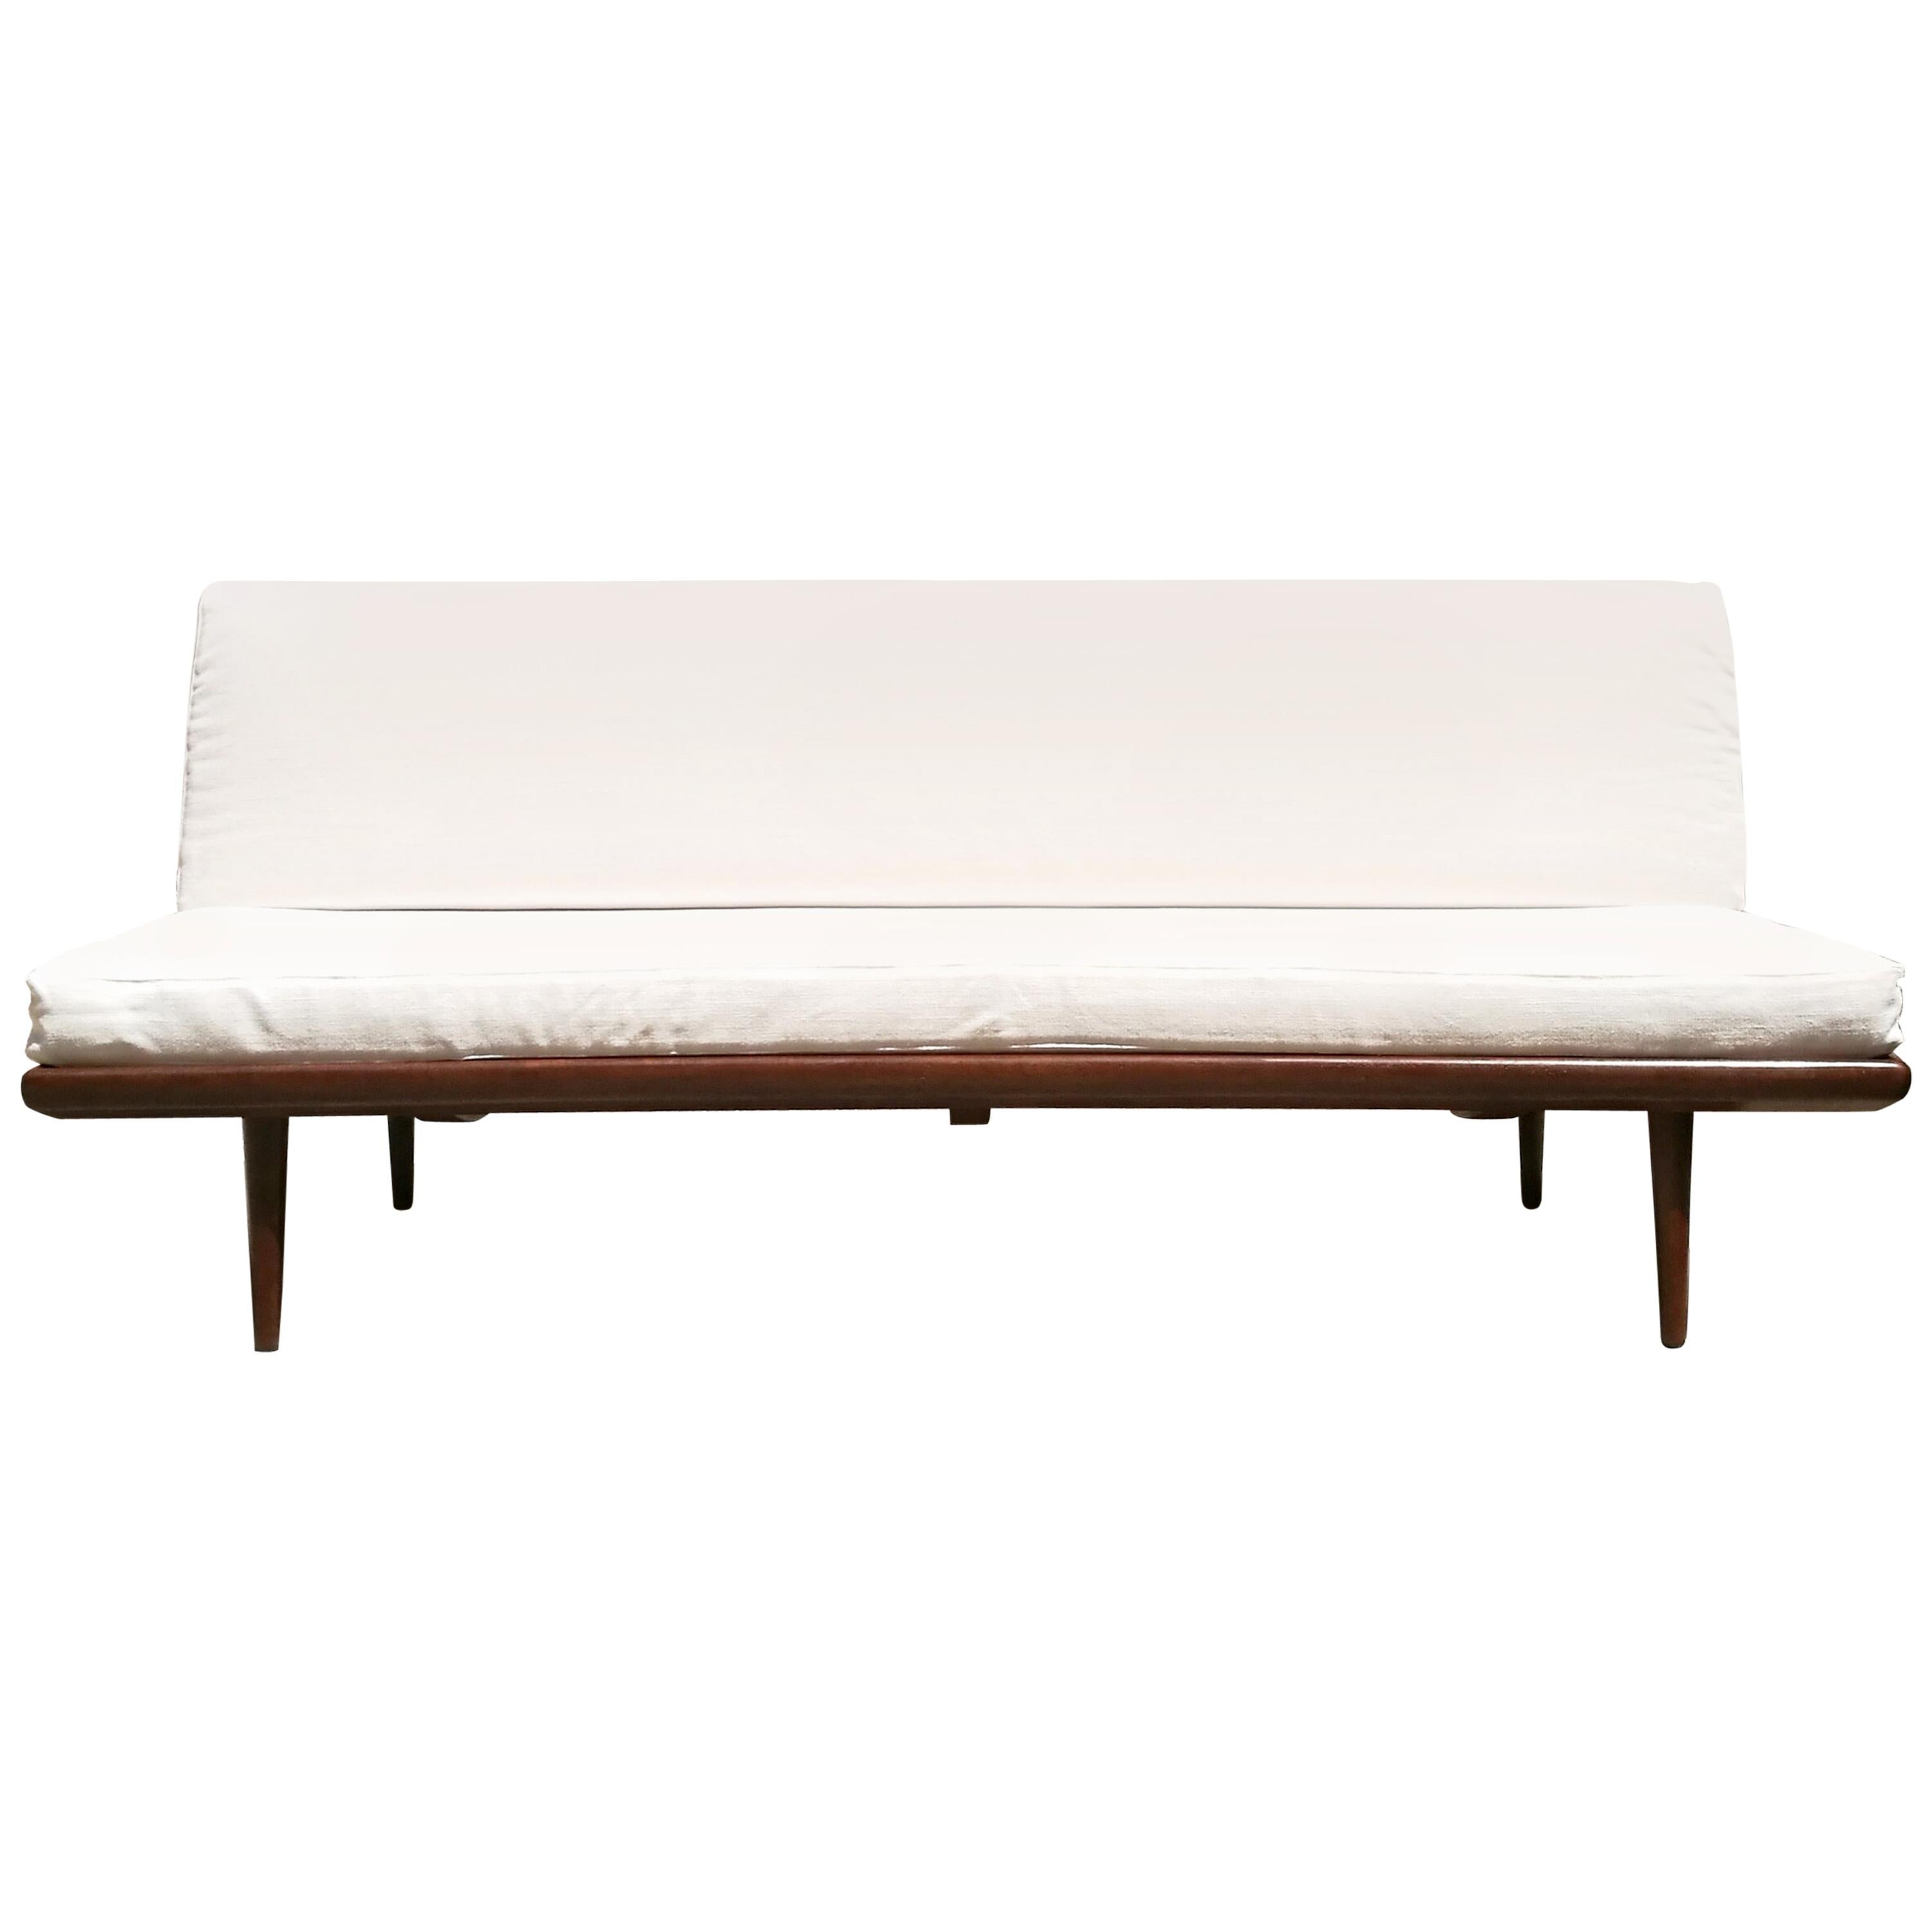 Dormeuse "Minerva" by Peter Hvidt for France and Sons, Denmark, Teak and Fabric